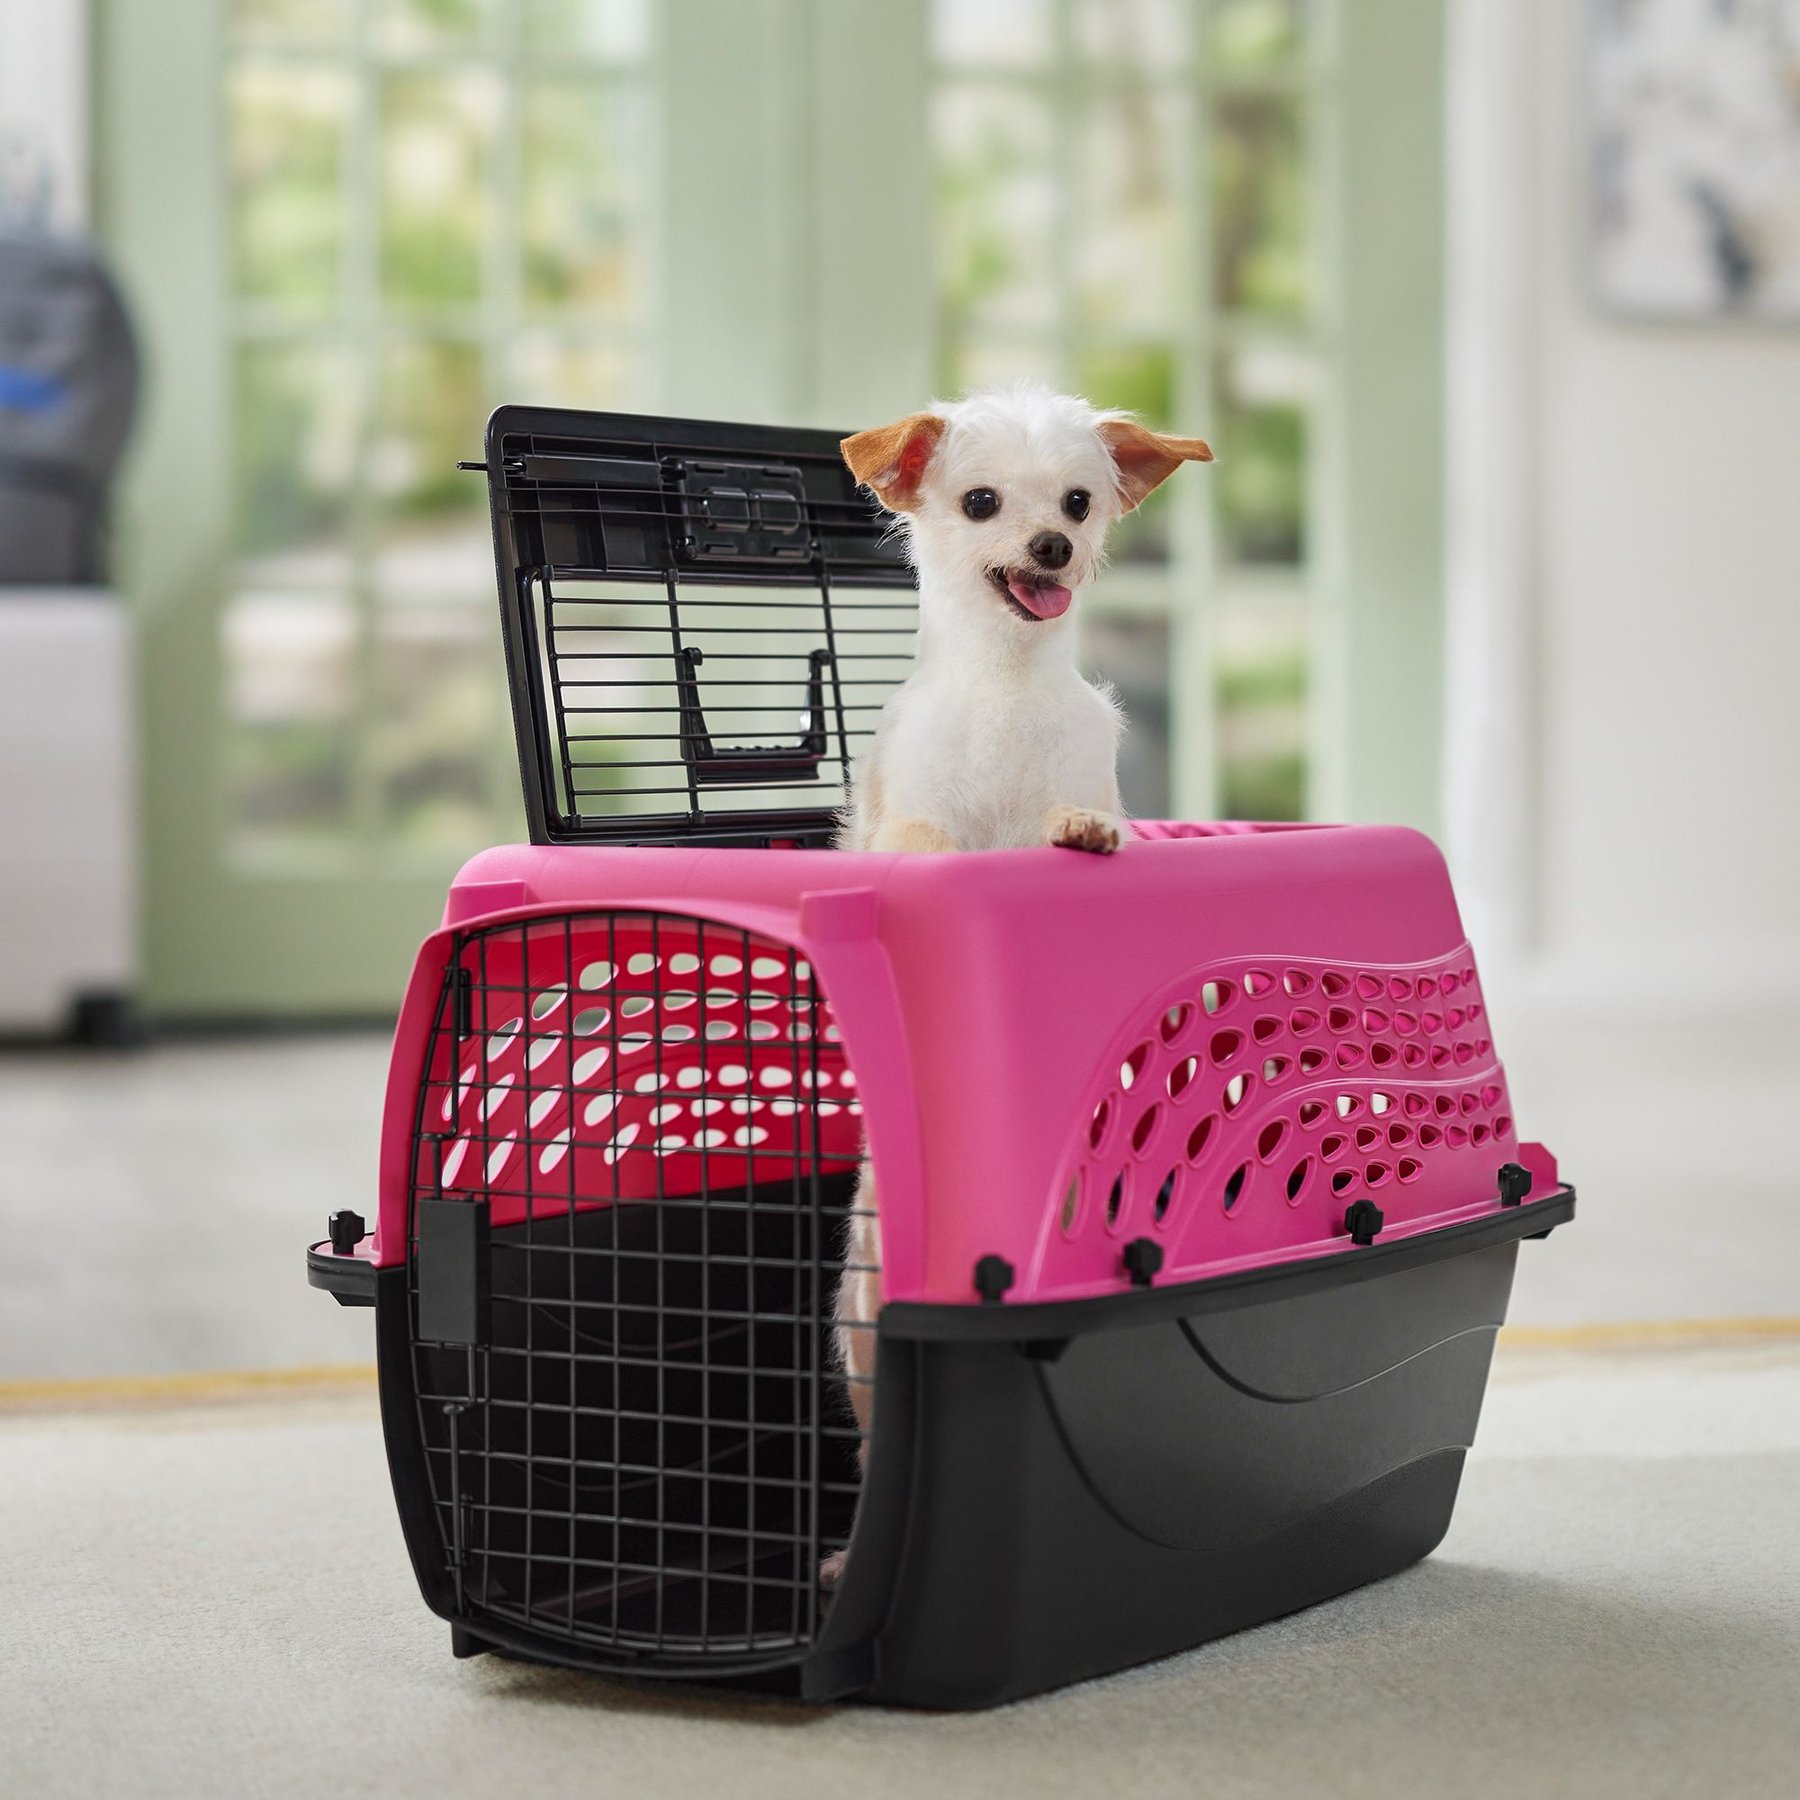 MidWest Homes for Pets Spree Travel Pet Carrier | Hard-Sided Pet Kennel  Ideal for Toy Dog Breeds, Small Cats & Small Animals | Dog Carrier Measures